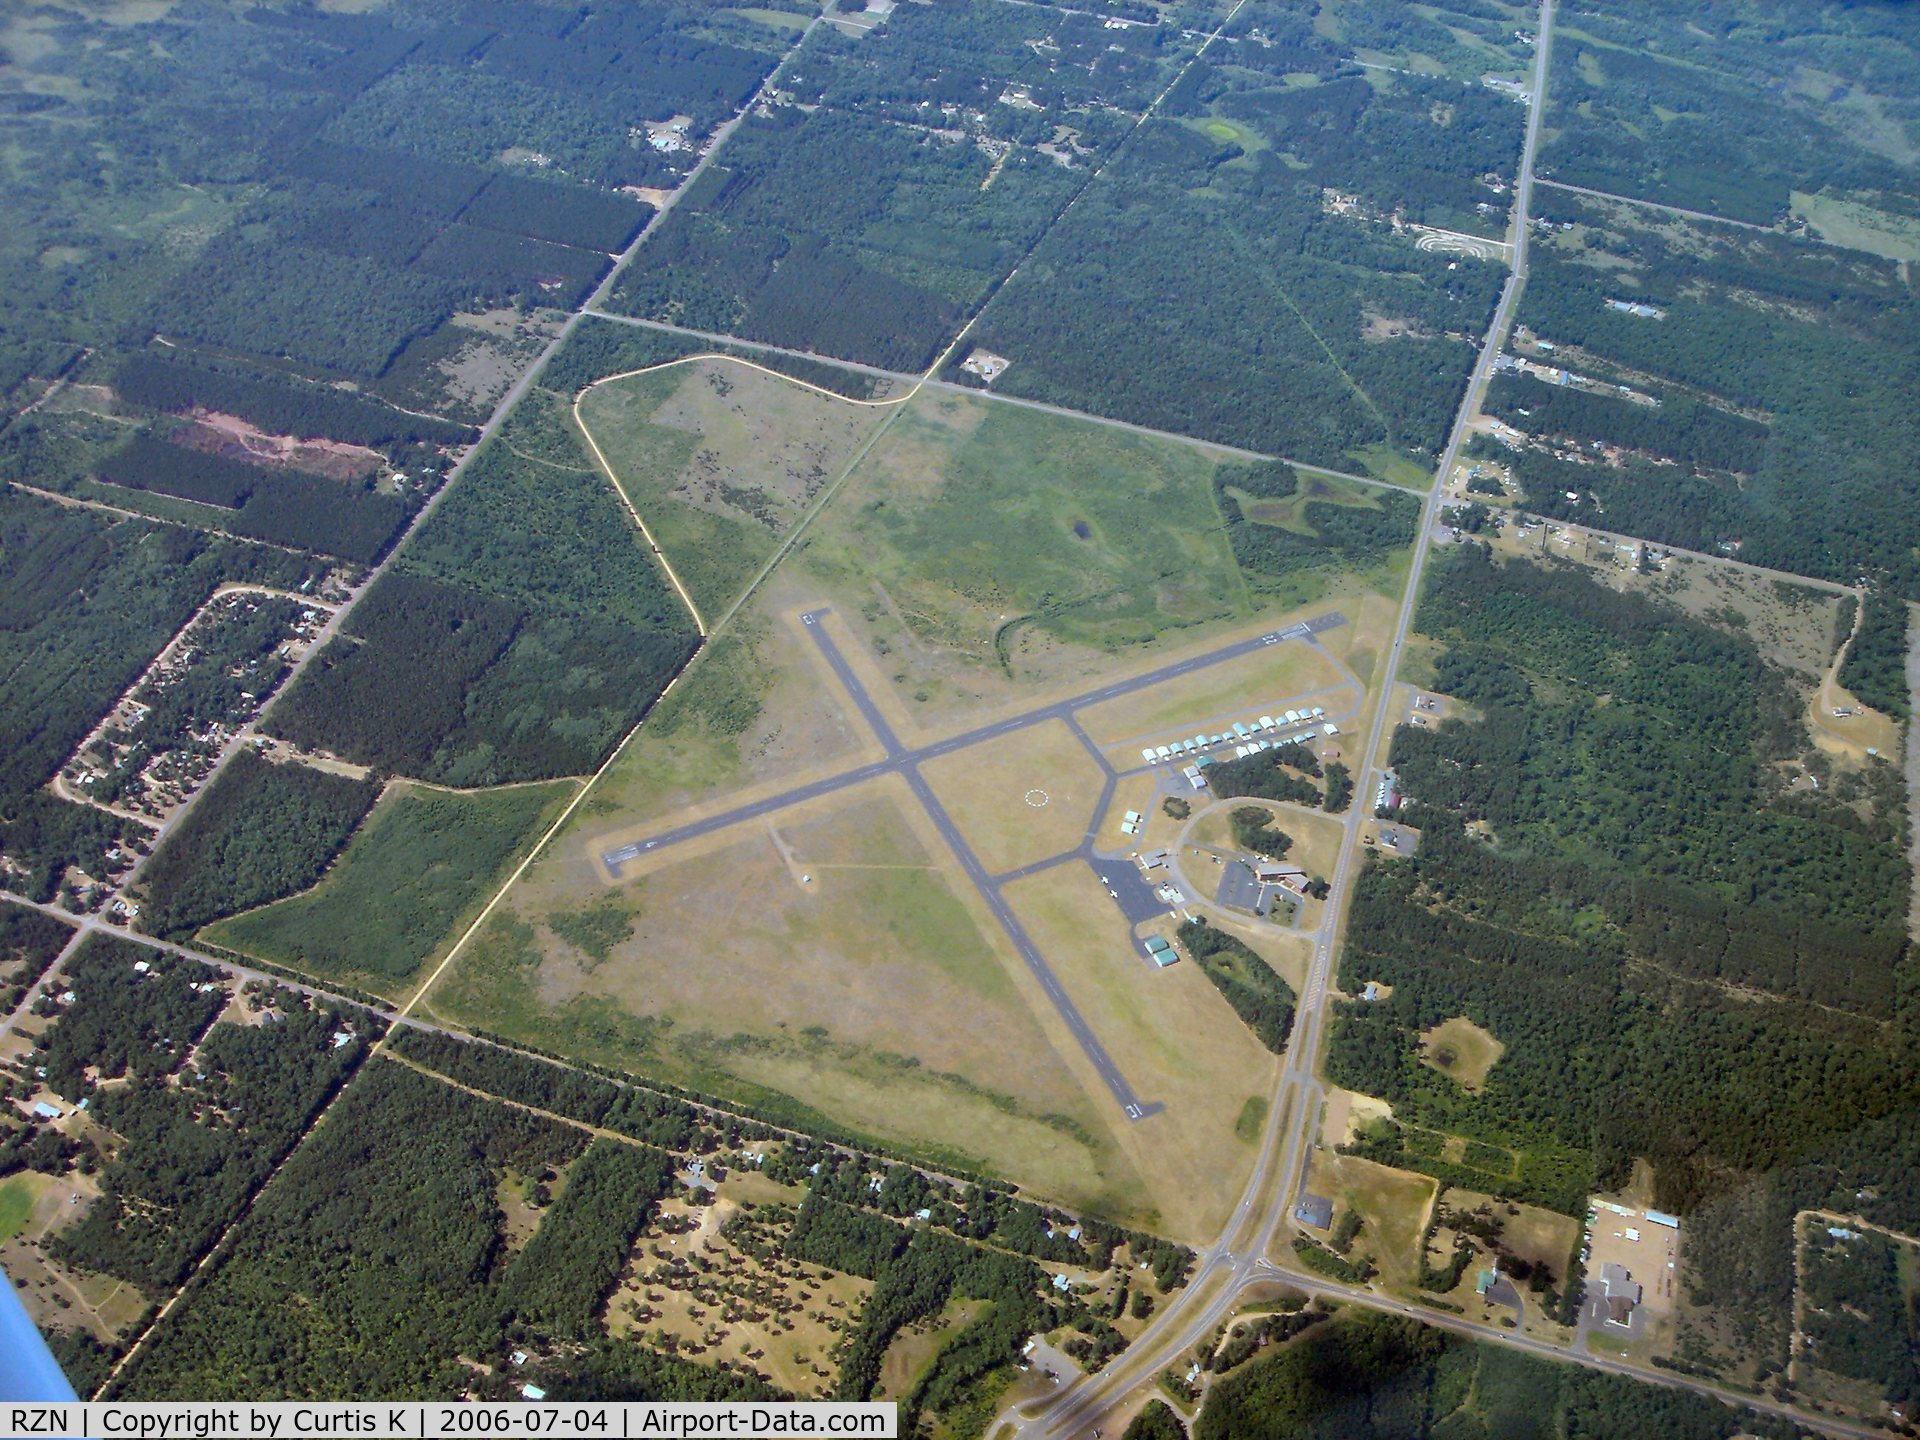 Burnett County Airport (RZN) - Photo taken from a Skyhawk enroute to Duluth